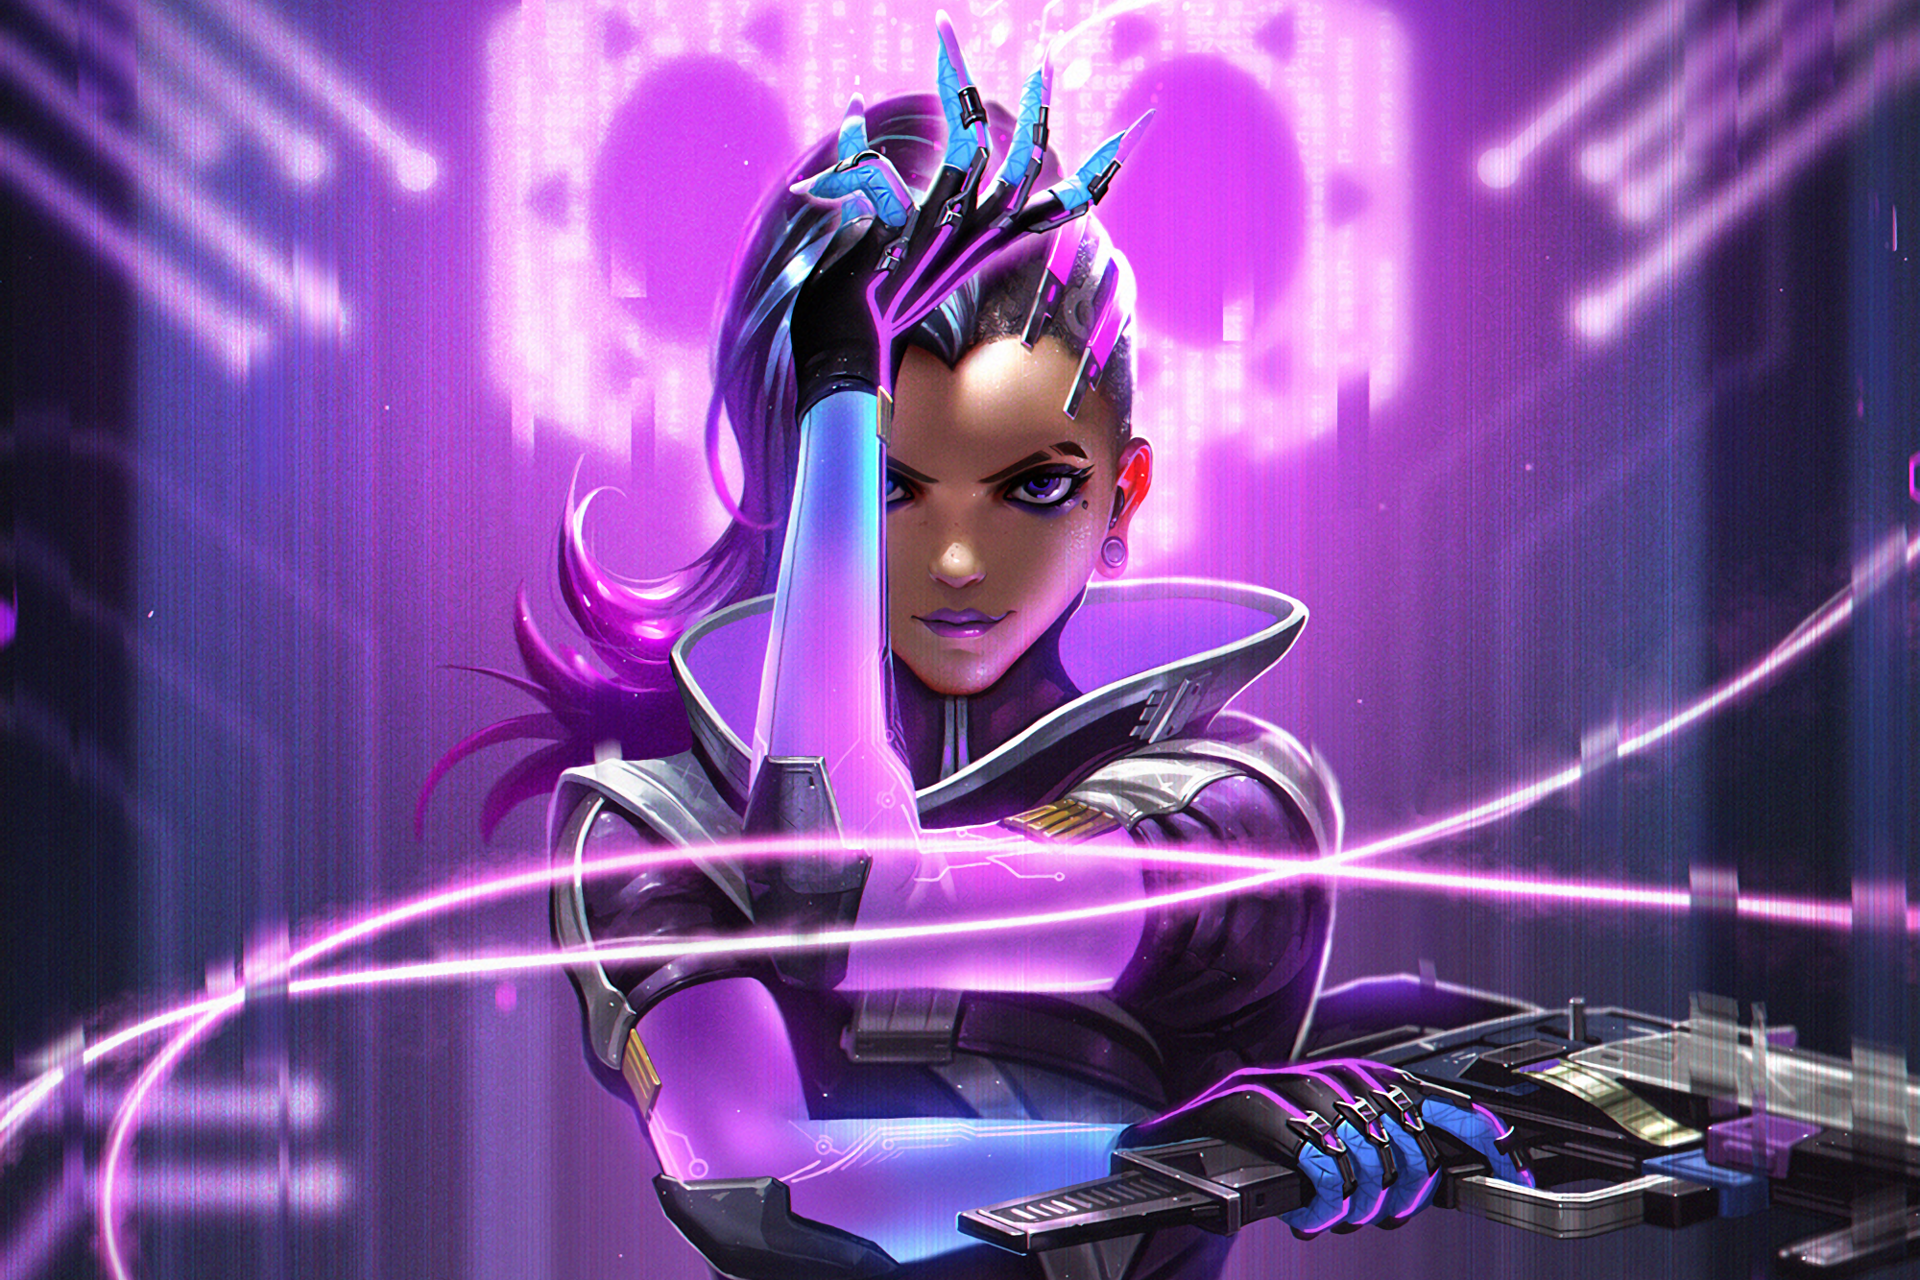 HD wallpaper and background featuring Sombra from the video game Overwatch, depicted in vibrant purple hues with digital effects in the background.